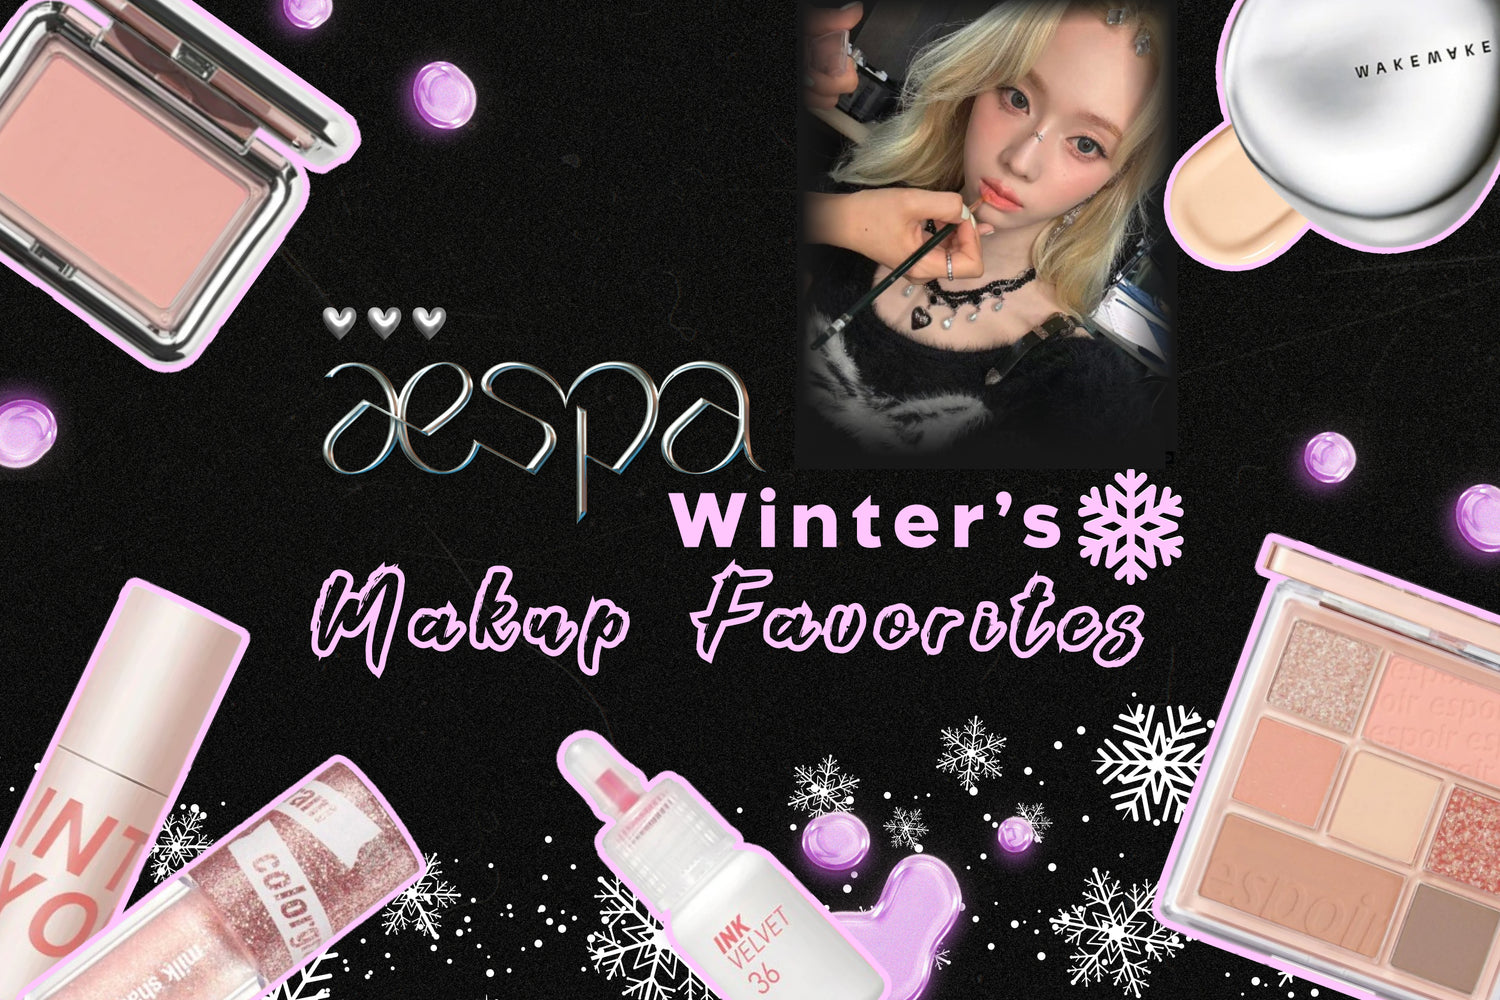 Aespa Winter's Makup Favorites｜Get the Same Beauty Picks in LAMOUR